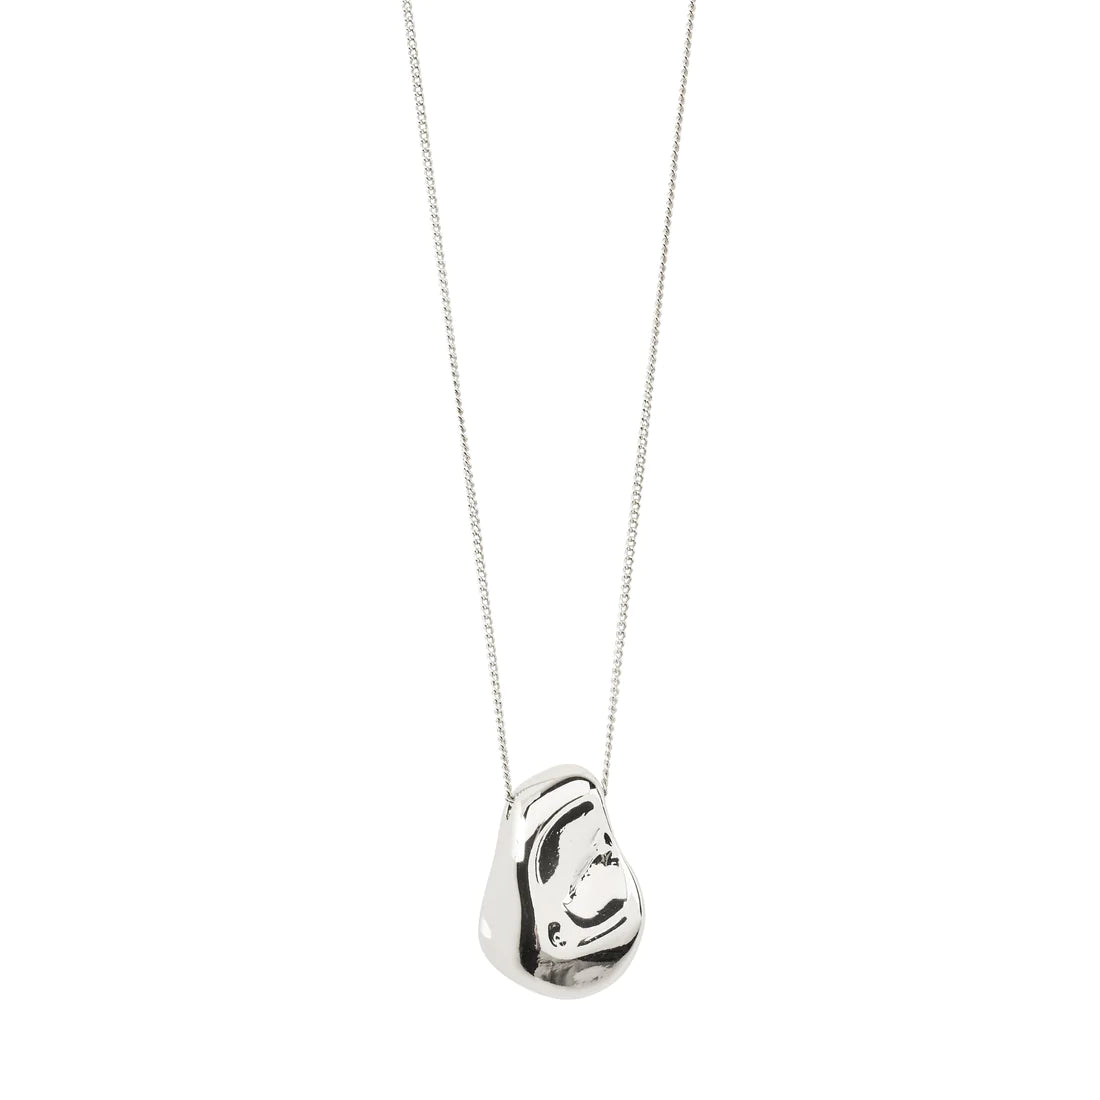 652336001//652332001 Chantal recycled pendant necklace